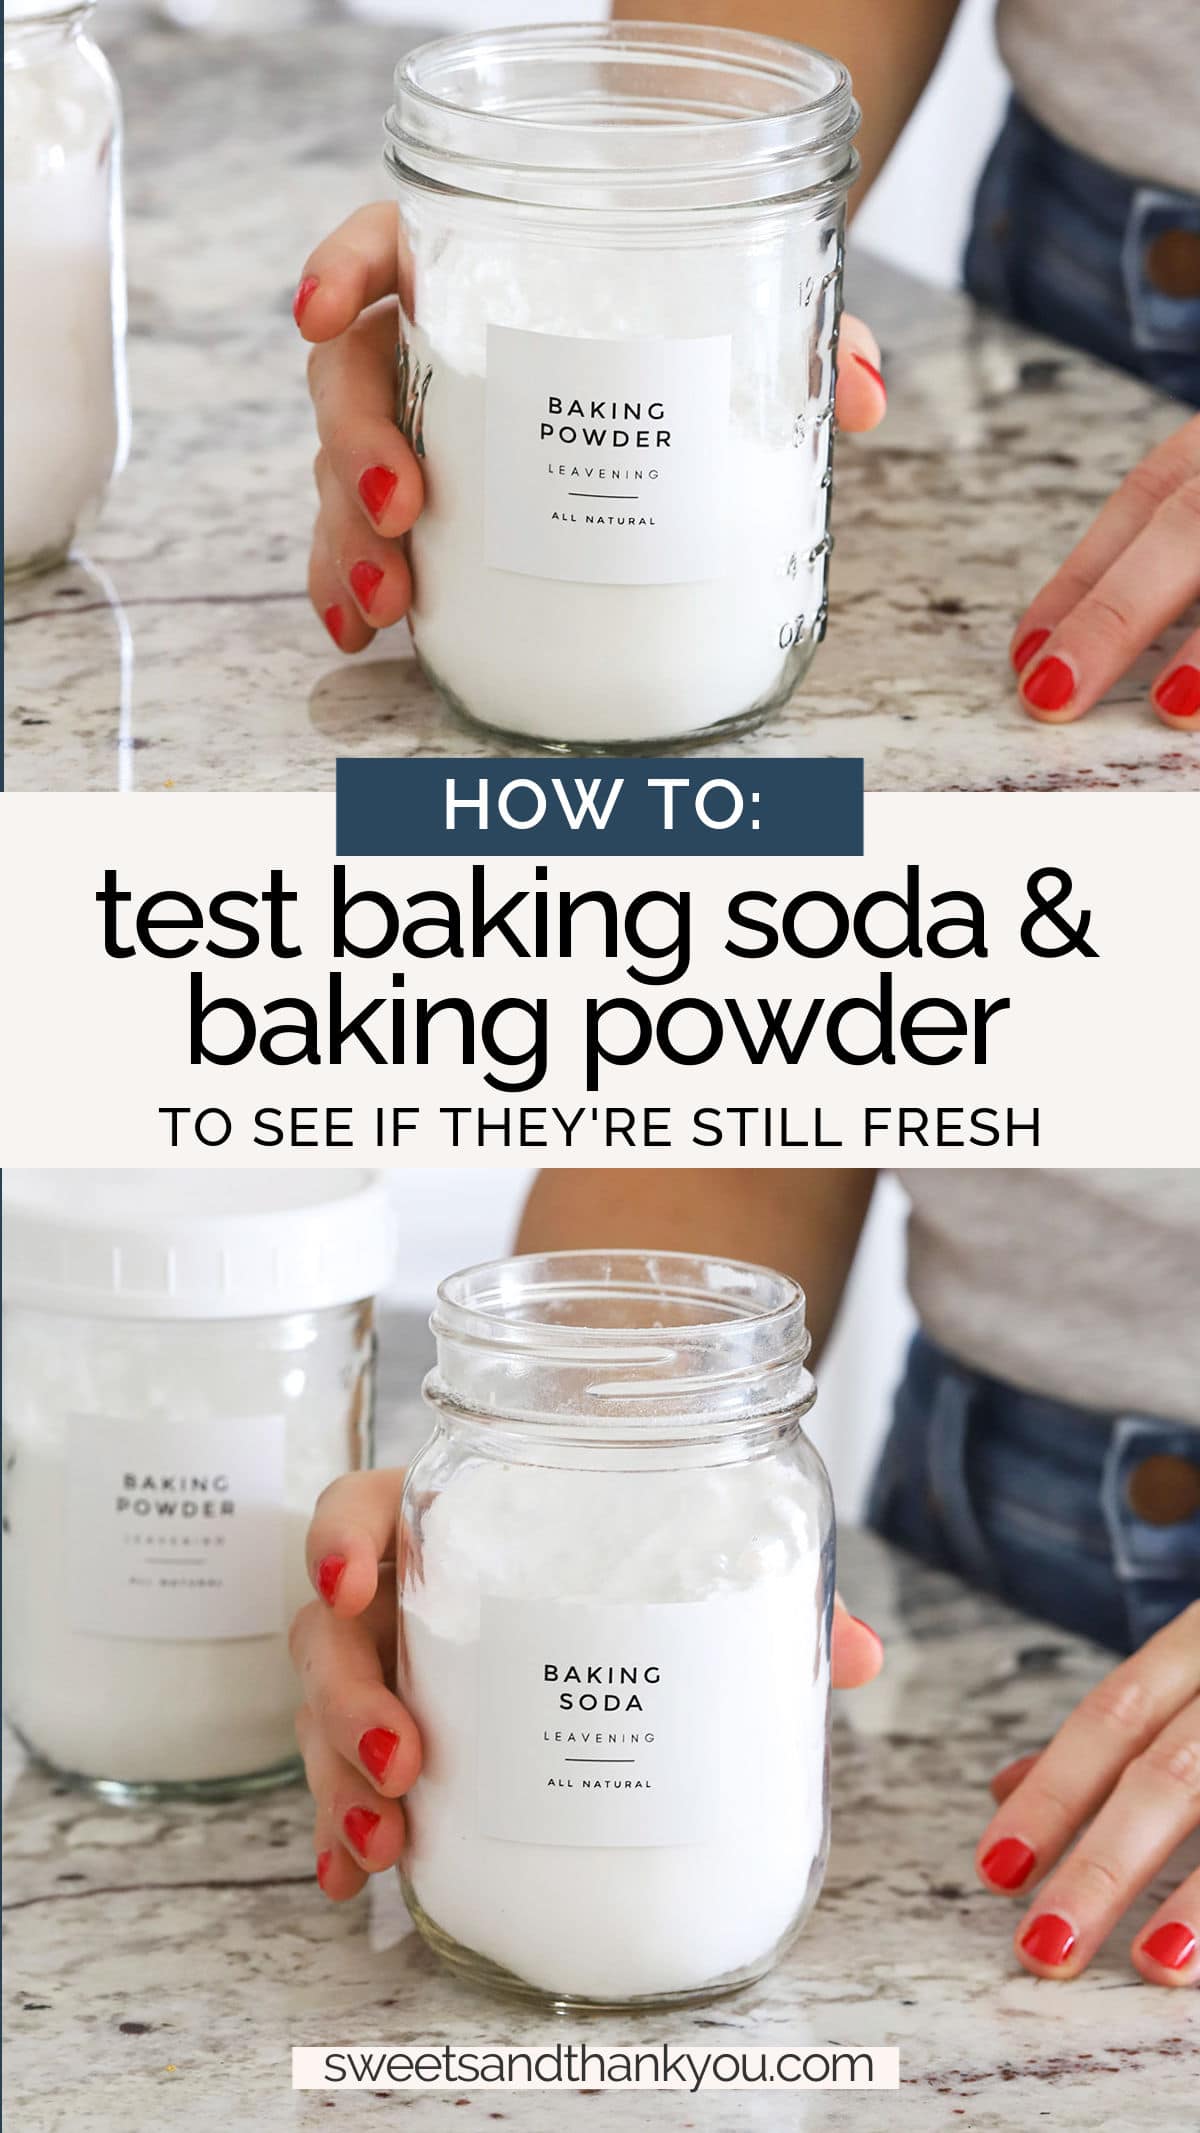 Ever wondered if your baking powder or baking soda is still good? Check your baking soda & baking powder freshness with these quick tips! / how to tell if baking soda is fresh / how to tell if baking powder is fresh / how long does baking soda last after opening / how long does baking powder last after opening / baking powder substitution / how to test baking soda / how to test baking powder / what's the difference between baking powder and baking soda / how to tell if baking powder is bad